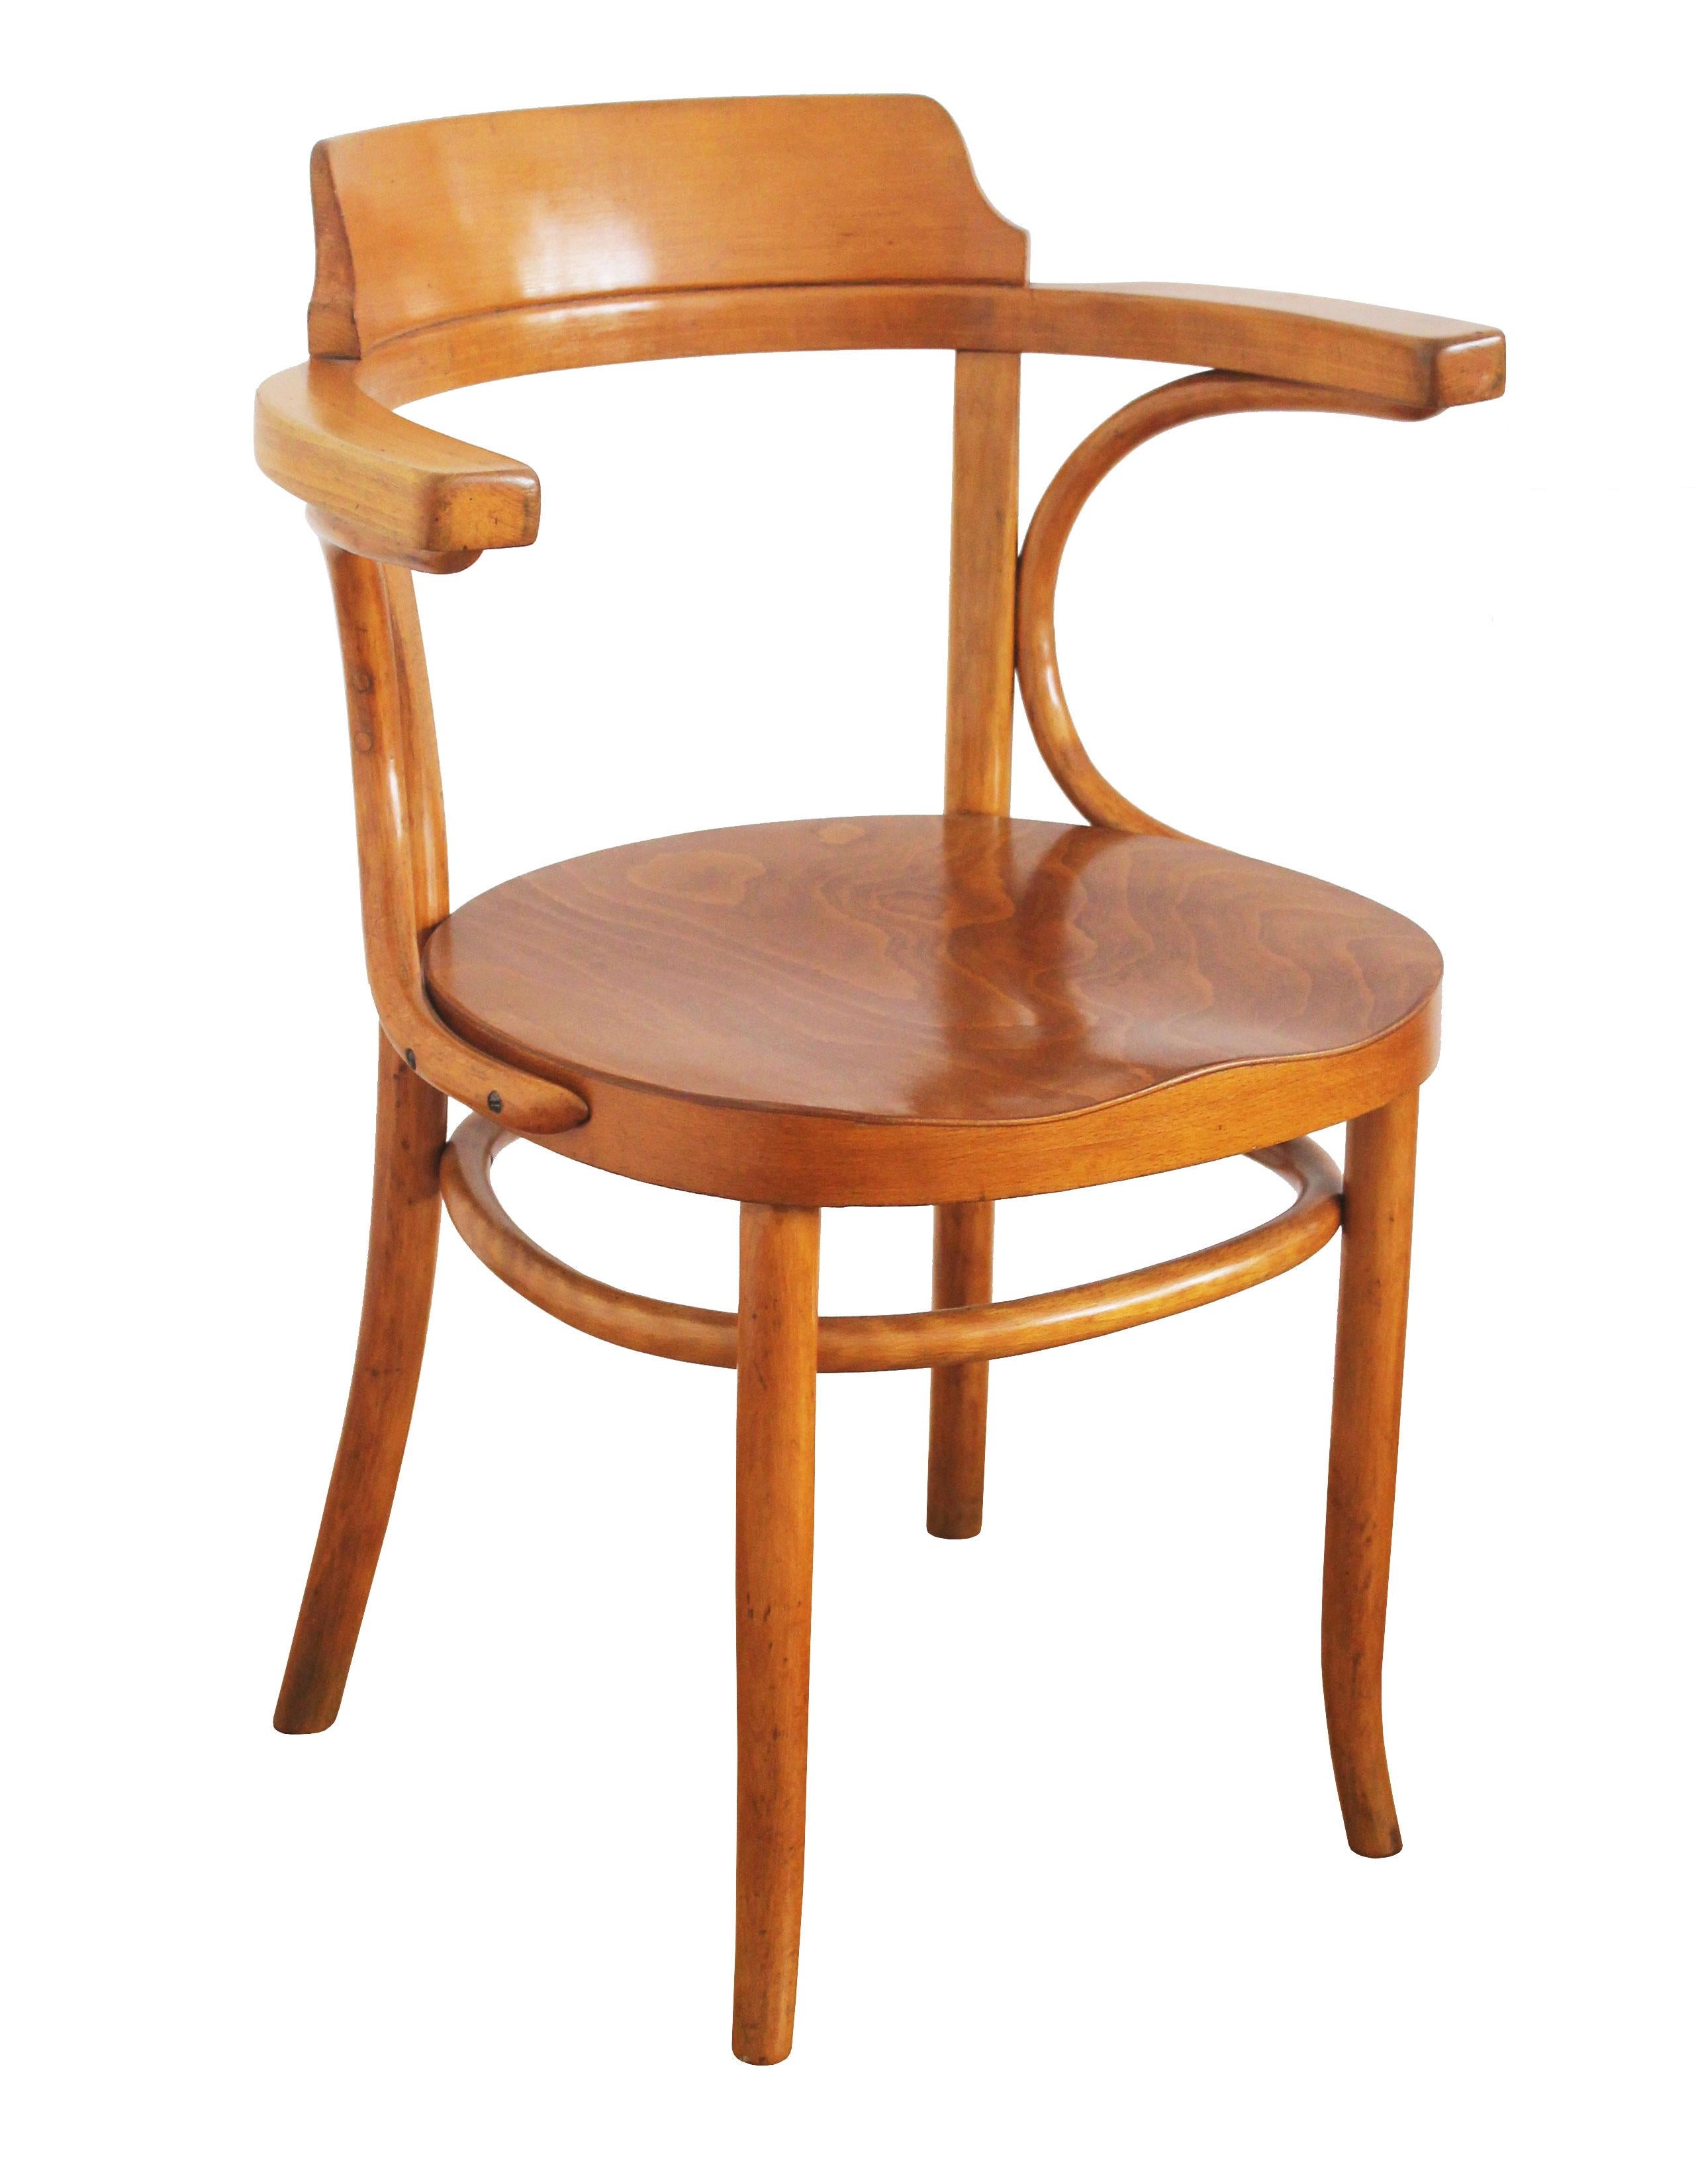 The dining chairs was originally designed by the Thonet company in 1904, and can be found in the Thonet sales catalogues as model number 3.

Despite having only Mundus label underneath the seat, this particular piece is believed to be made by the